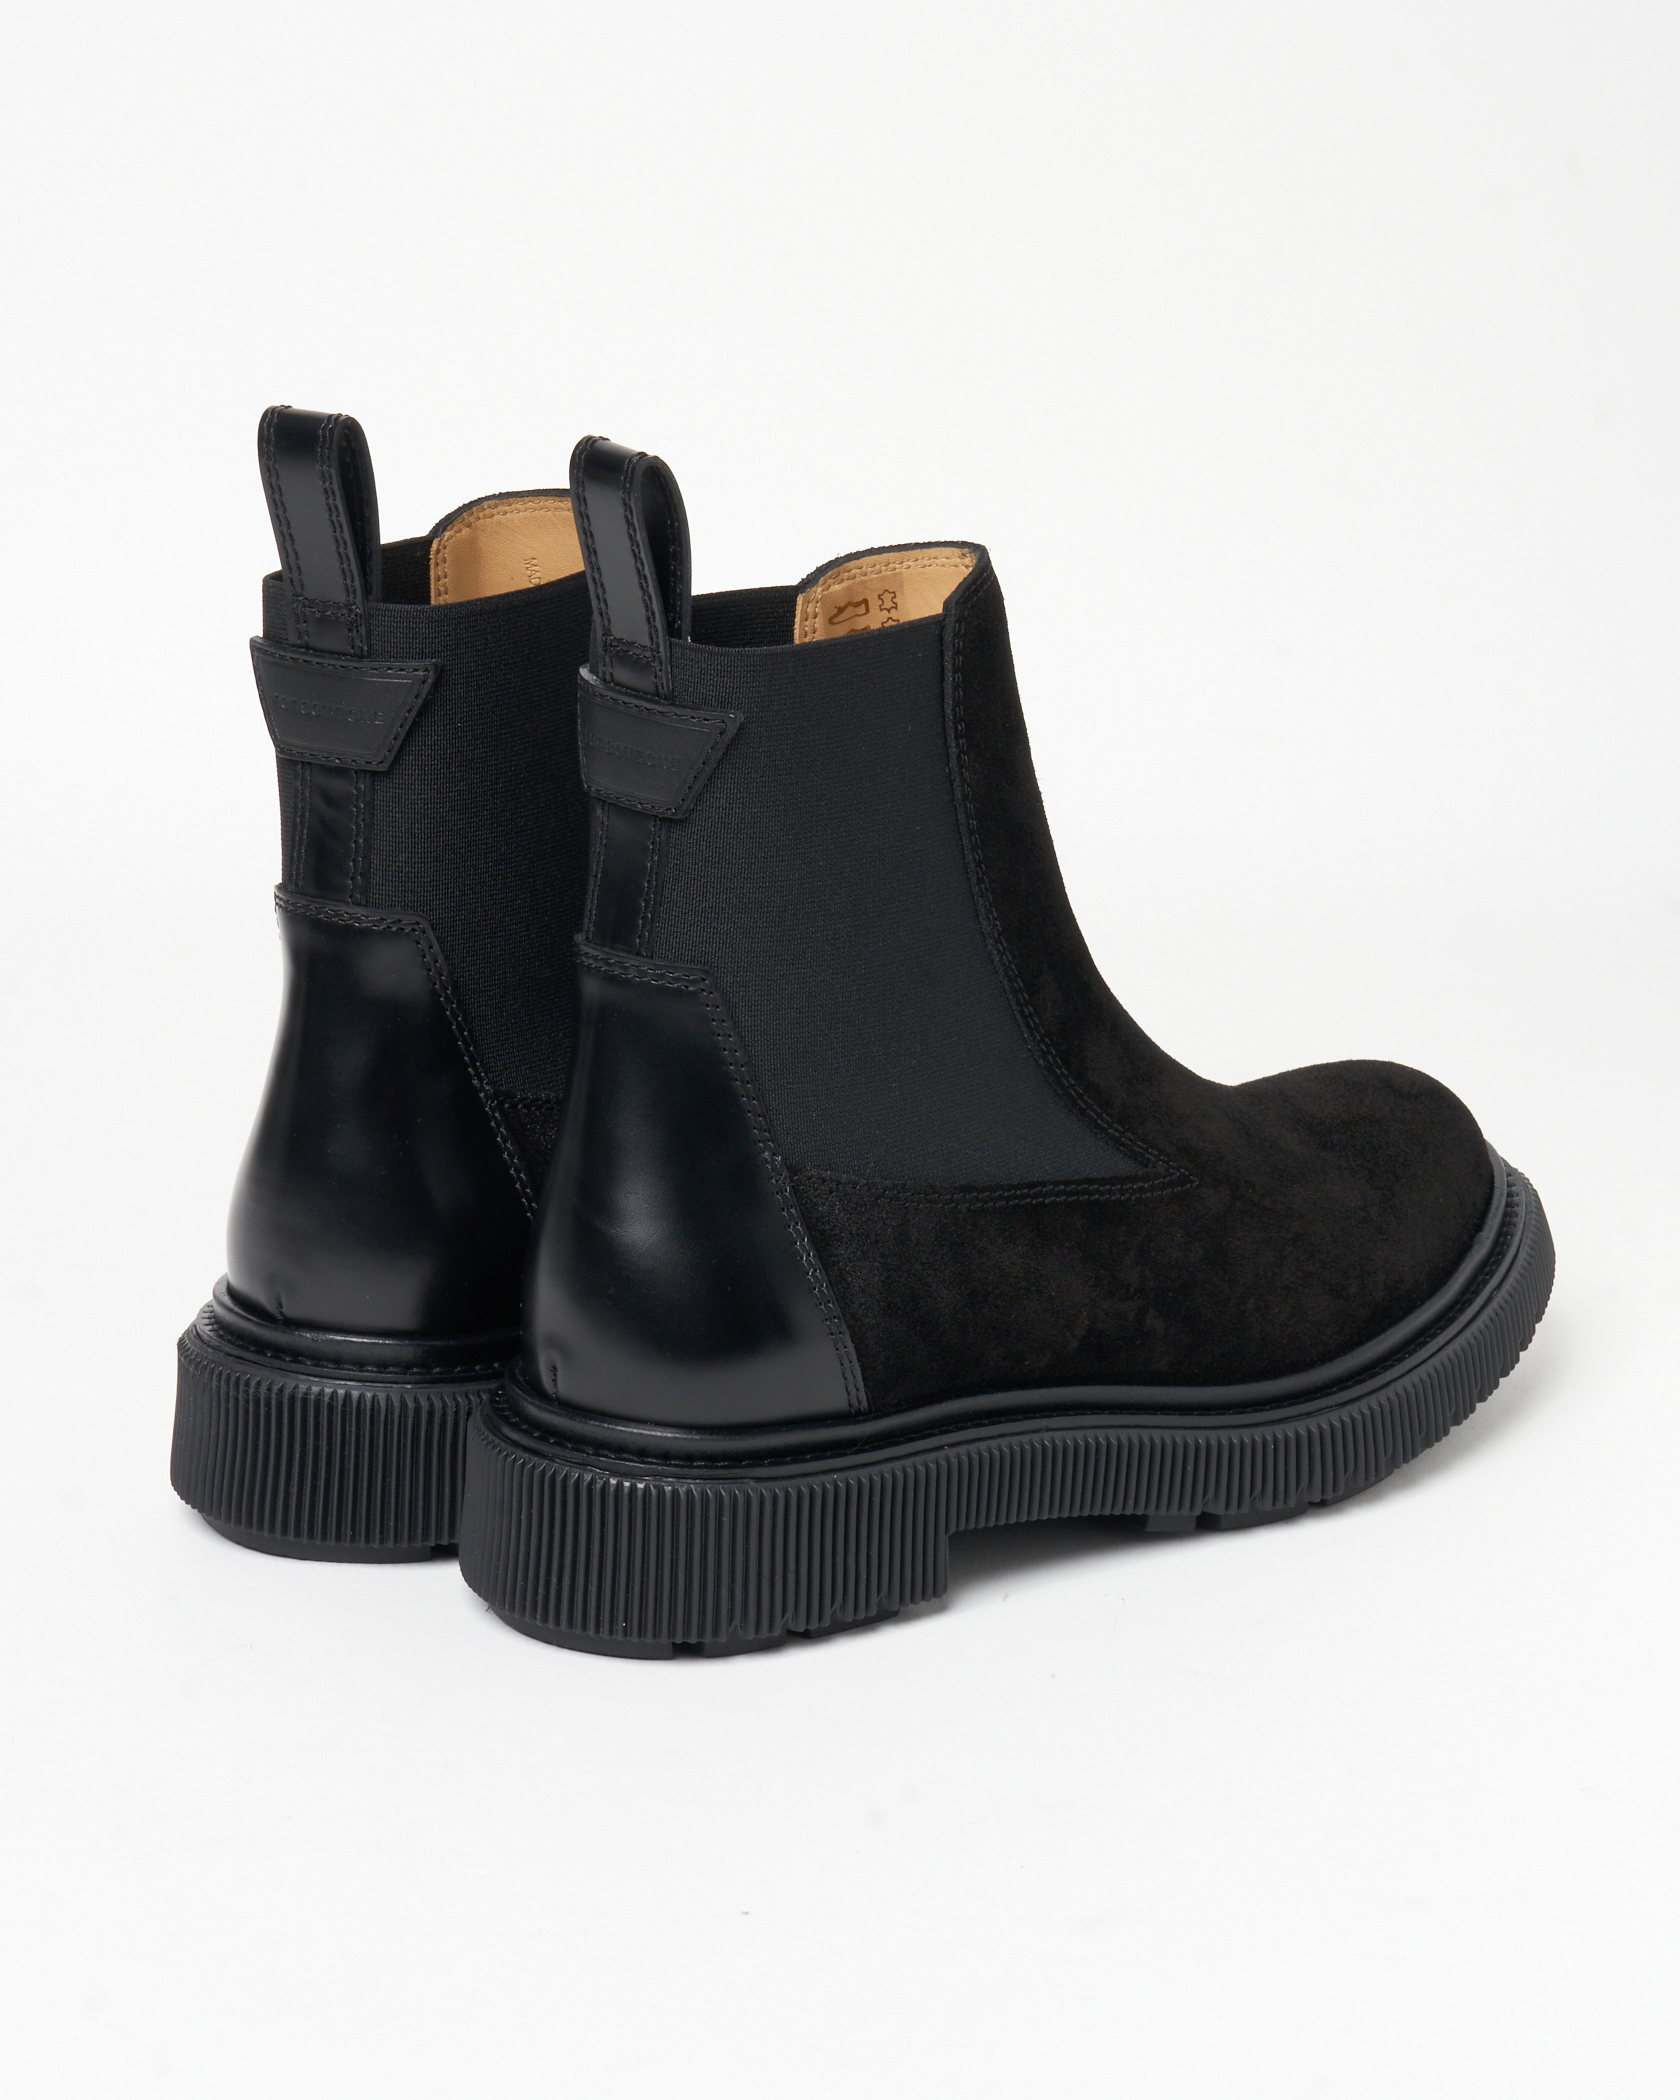 ADIEU × FORSOMEONE Chelsea boots